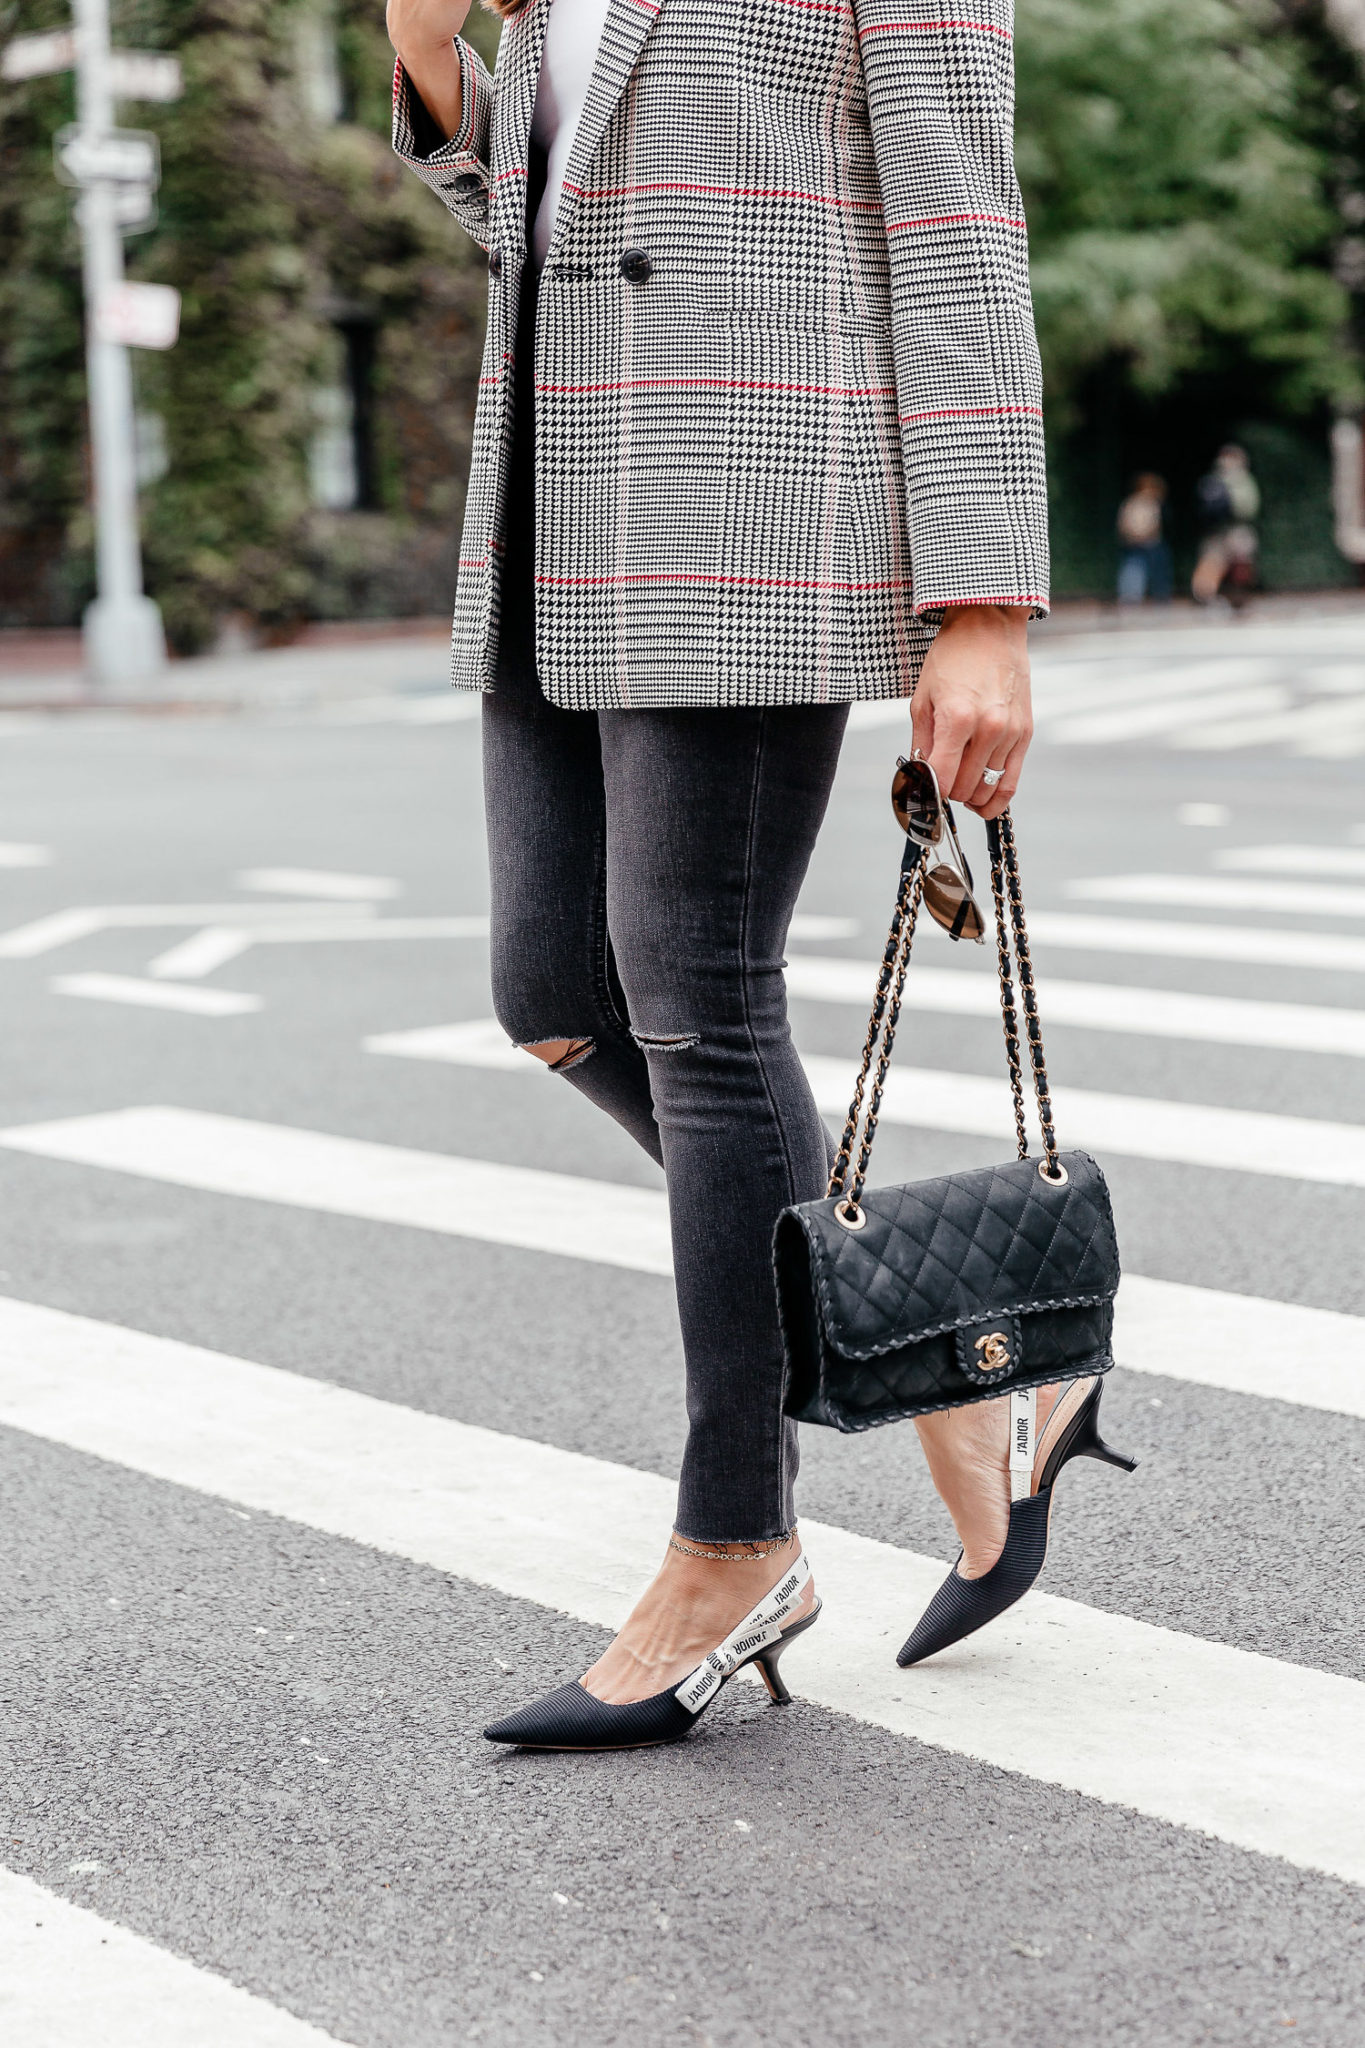 An easy Fall trend to adopt is the plaid blazer, seen here on South Florida fashion blogger Amanda of A Glam Lifestyle during NYFW with her Dior kitten heels and grey Wrangler denim